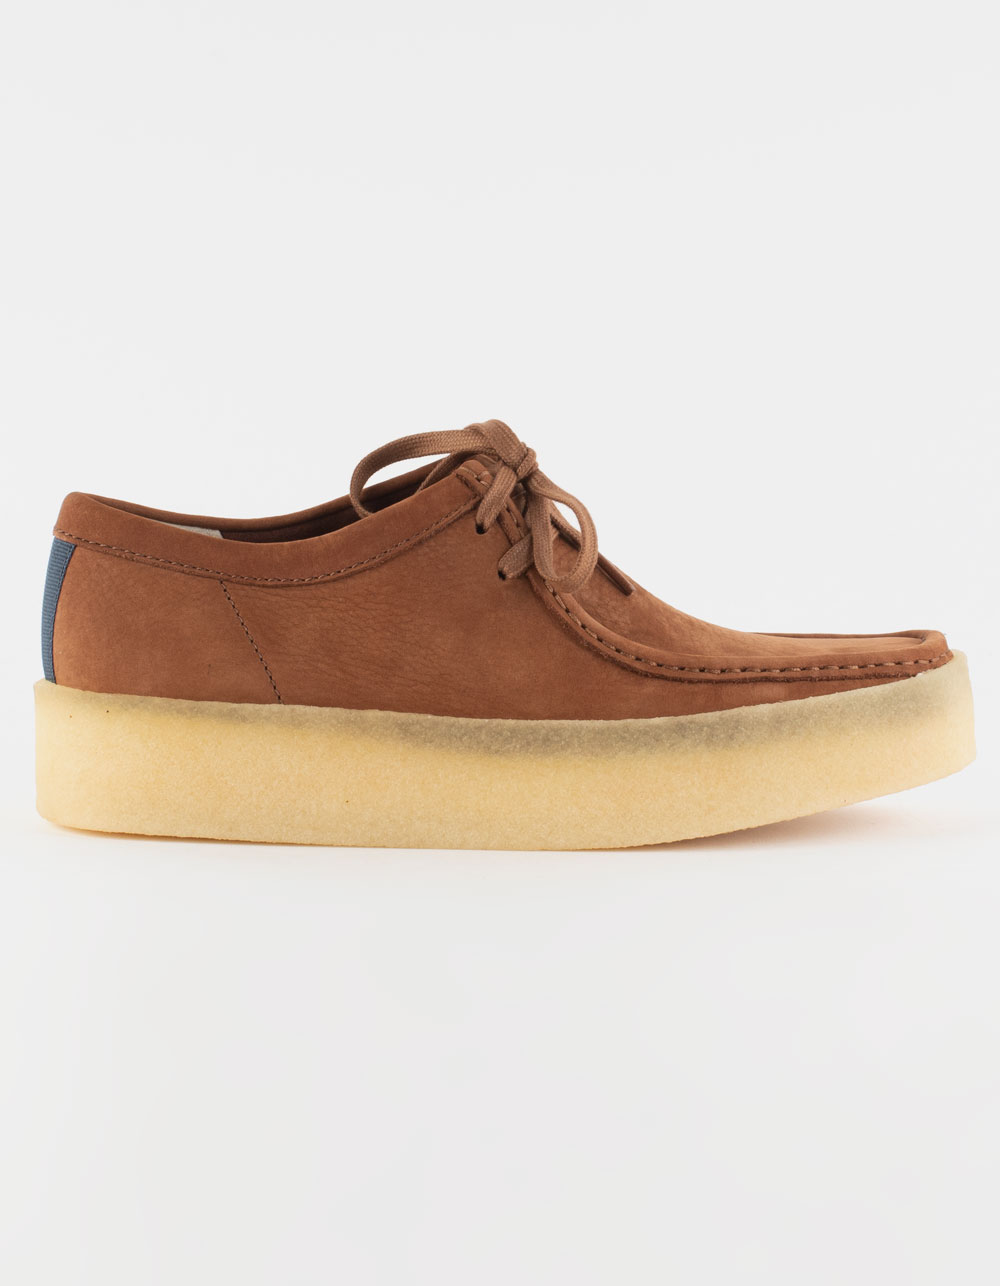 CLARKS Wallabee Cup Mens Shoes - TAN | Tillys